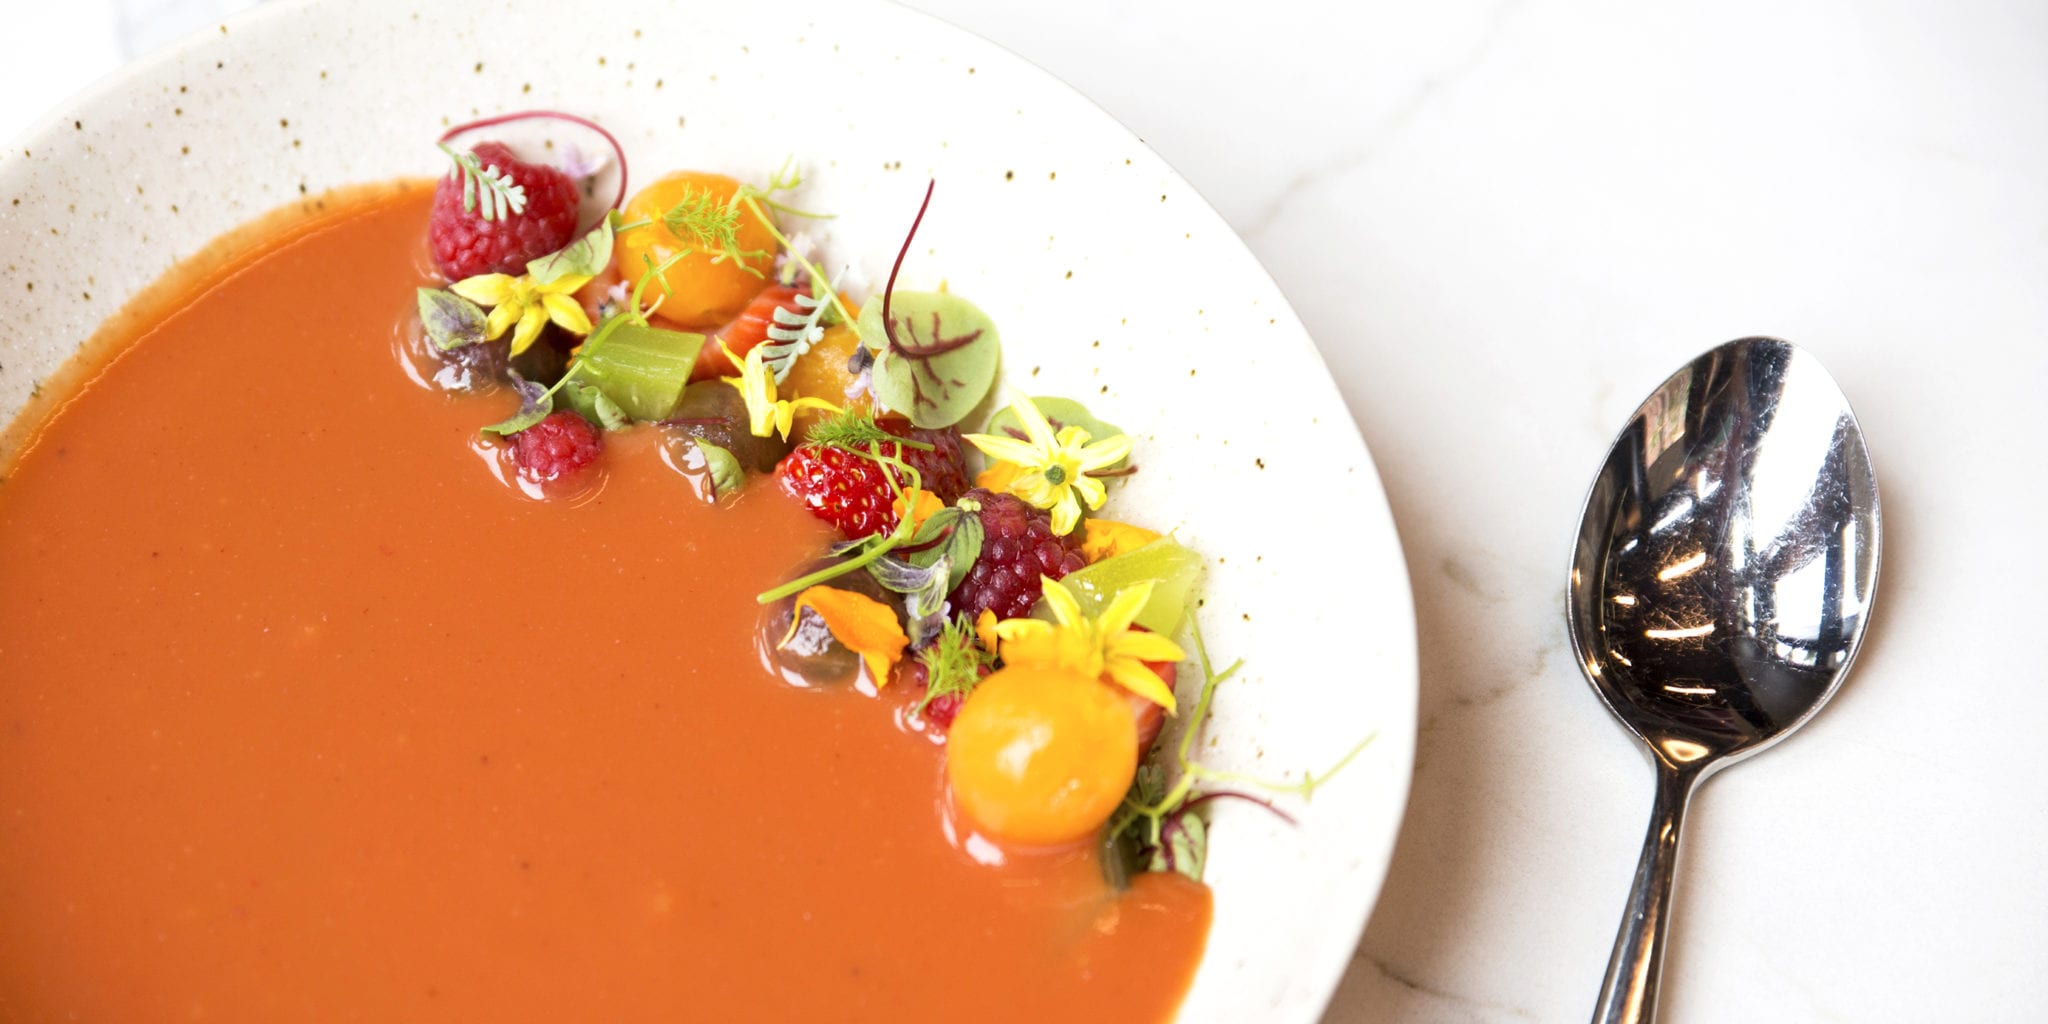 Tomato-Berry Gazpacho from Chef Nate Whiting of Four Ninety-Two in Charleston